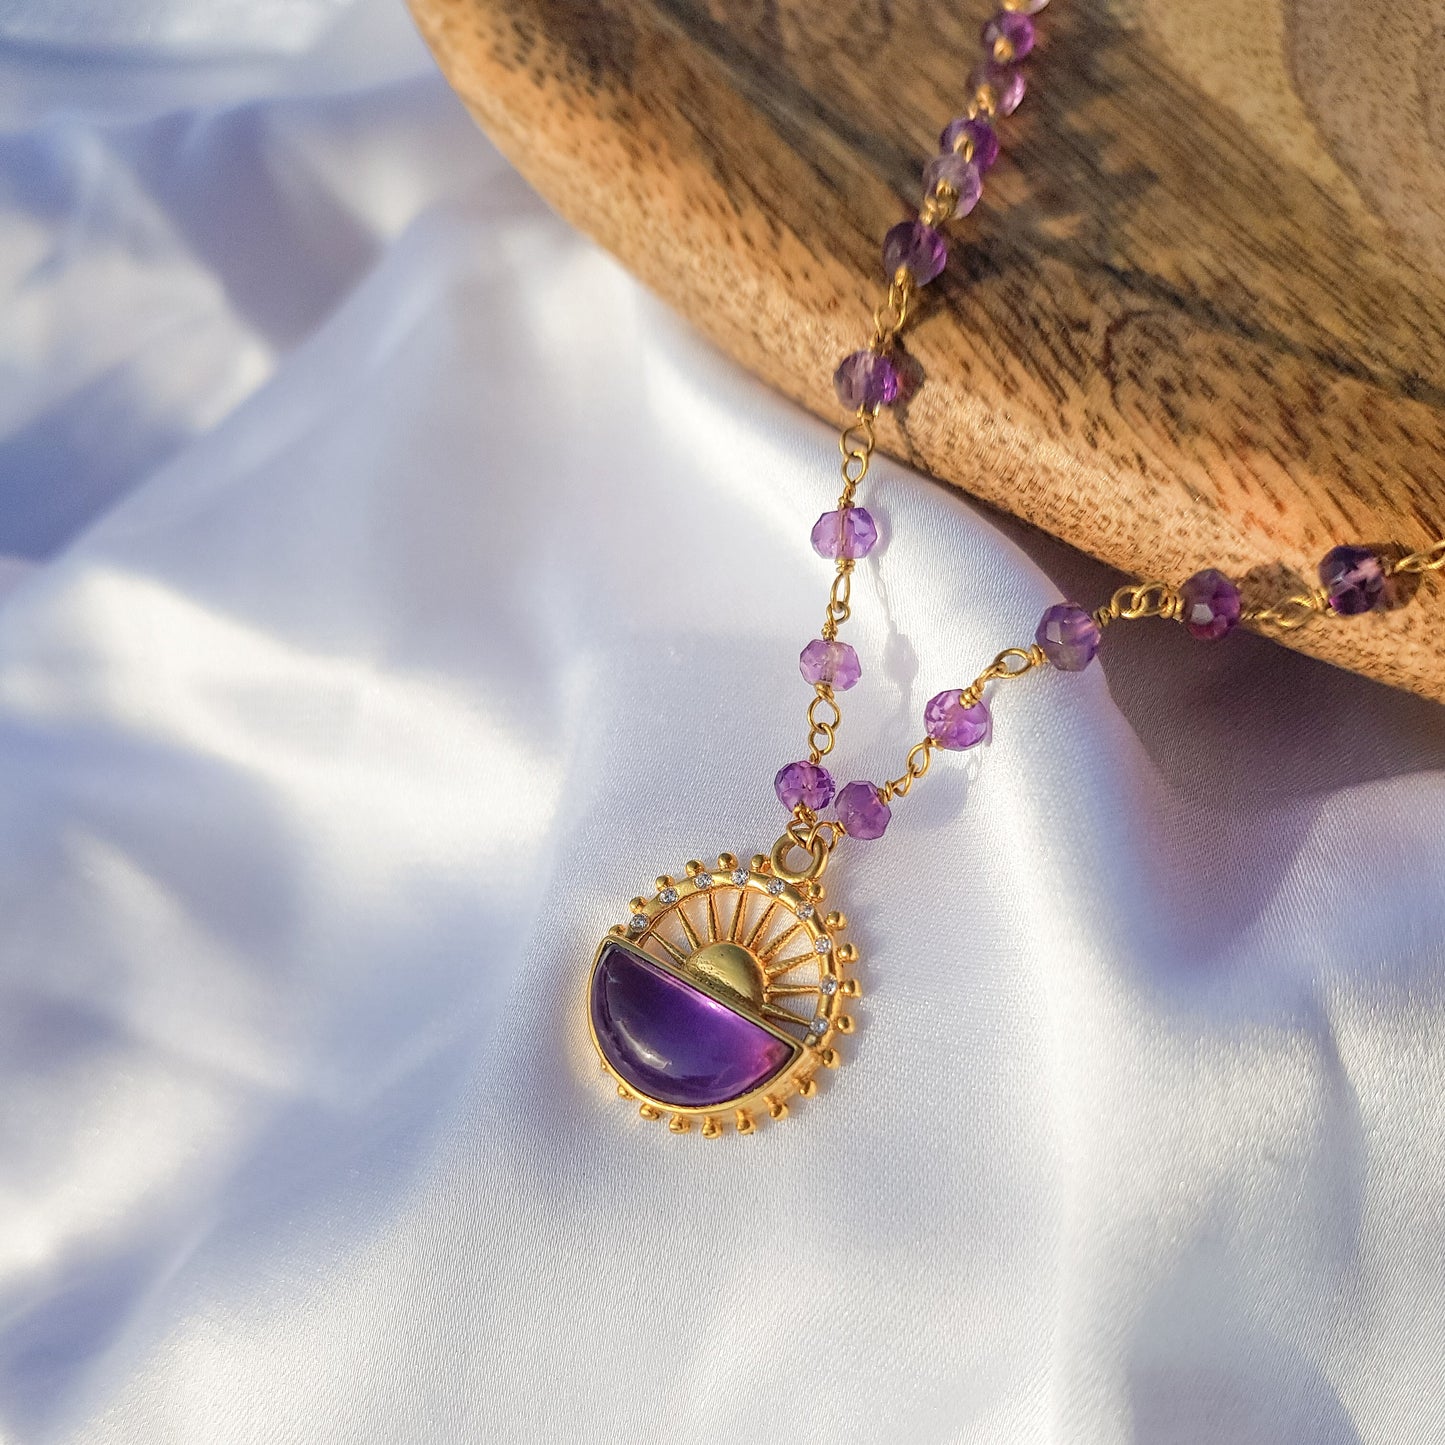 Amethyst beaded necklace with sun charm in 22k gold plated 925 sterling silver and zircon stones